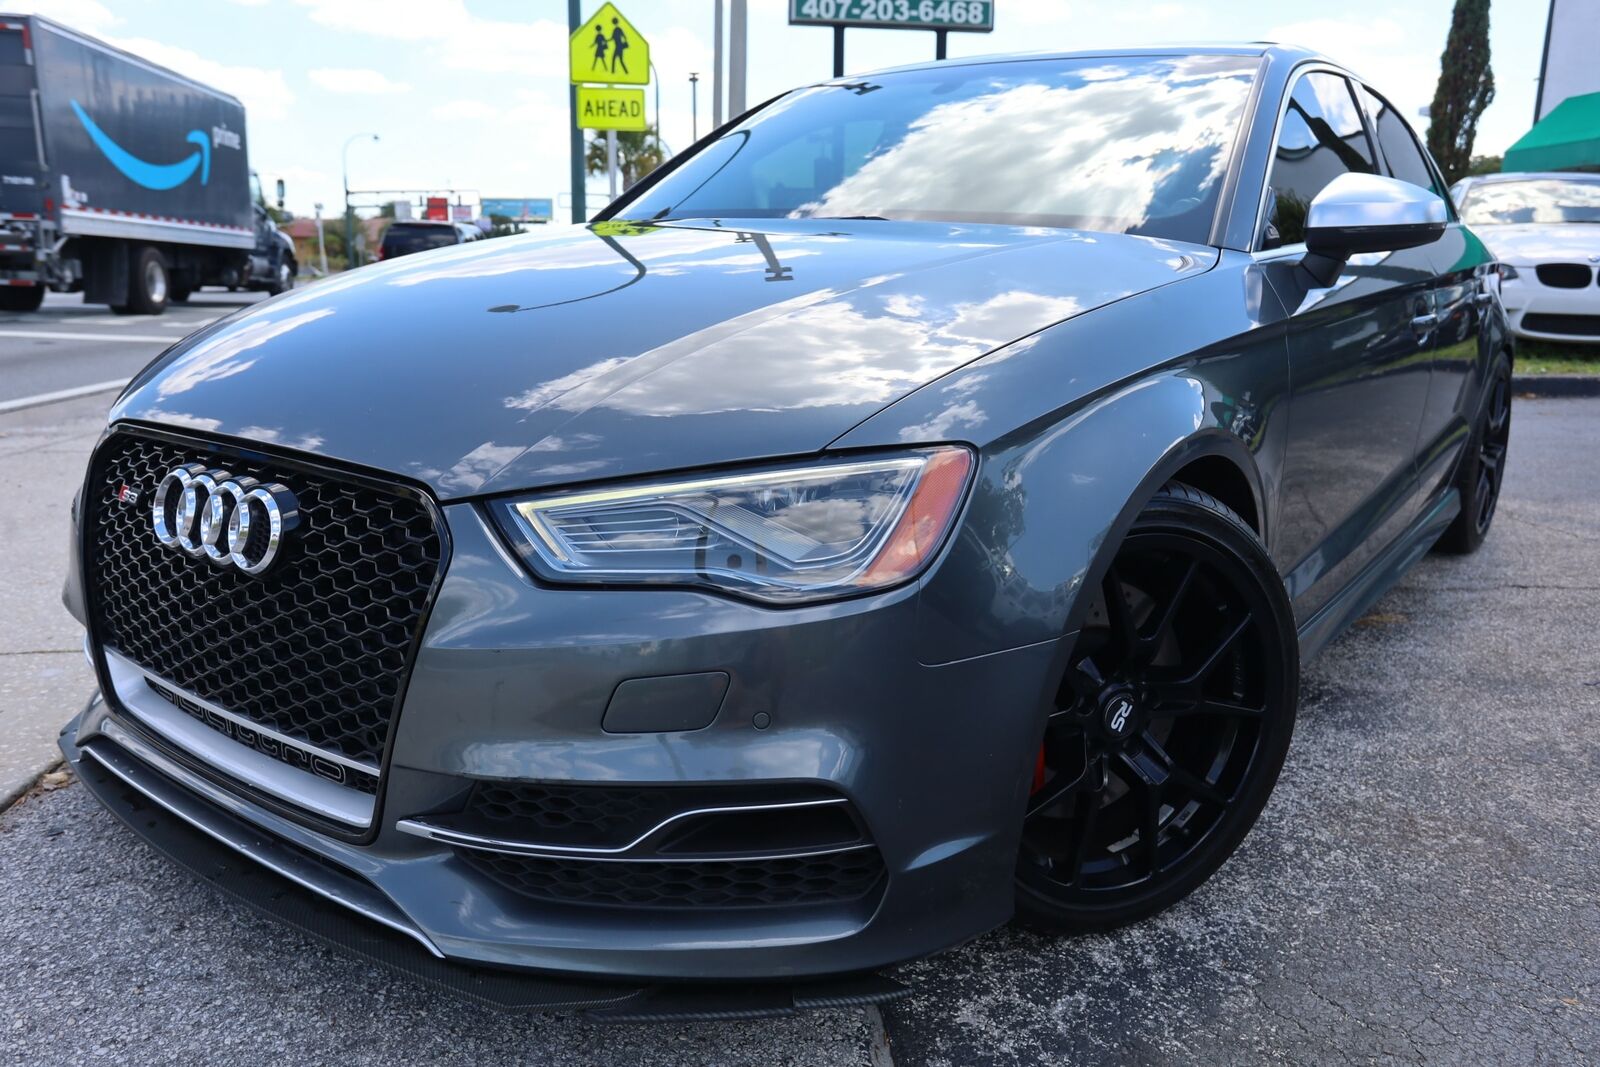 2015 Audi S3 2.0t Premium Plus (s Tronic) 2015 Audi S3, Gray With 46830 Miles Available Now!